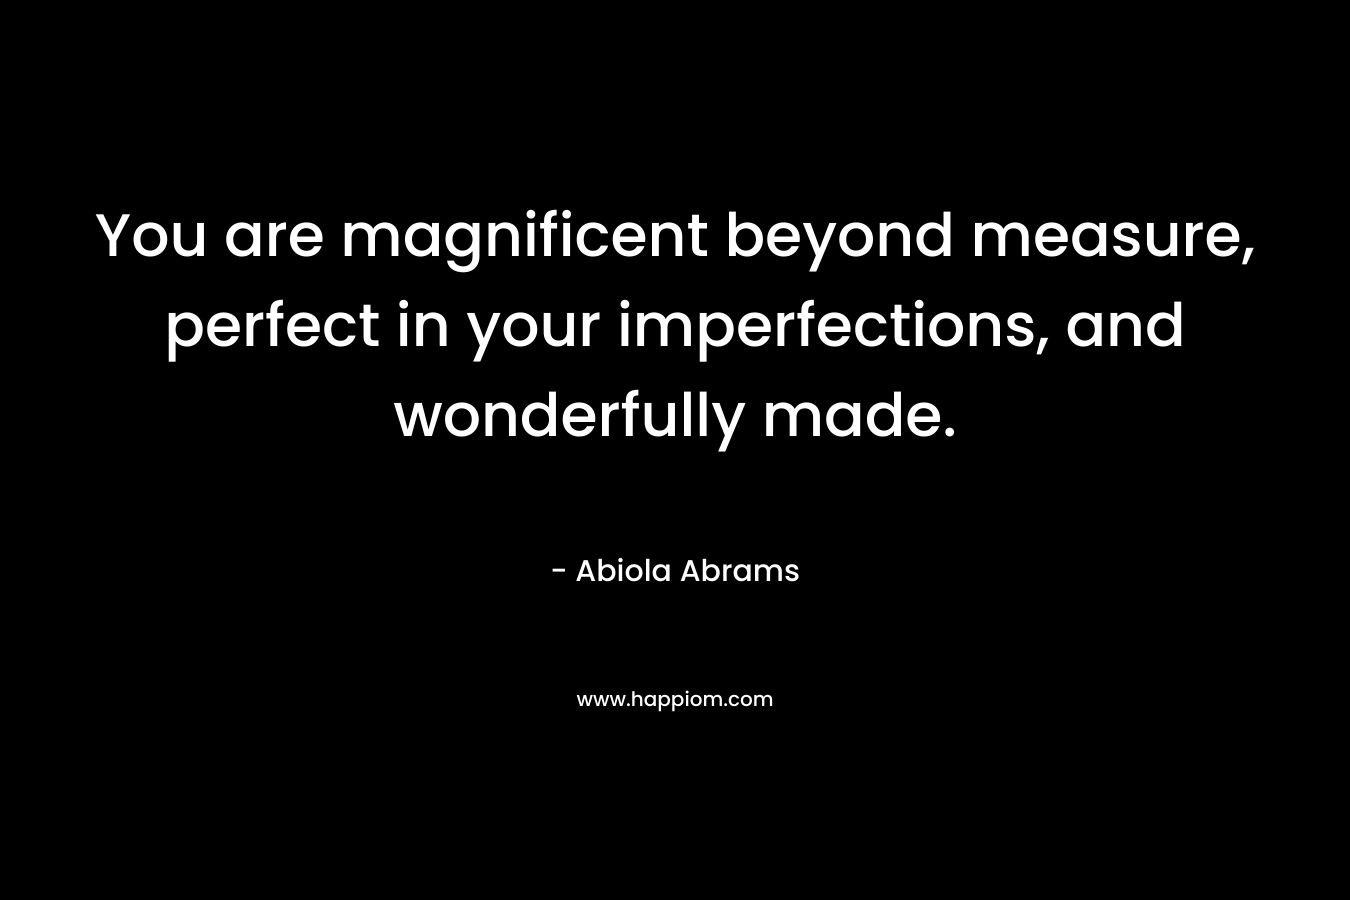 You are magnificent beyond measure, perfect in your imperfections, and wonderfully made. – Abiola Abrams